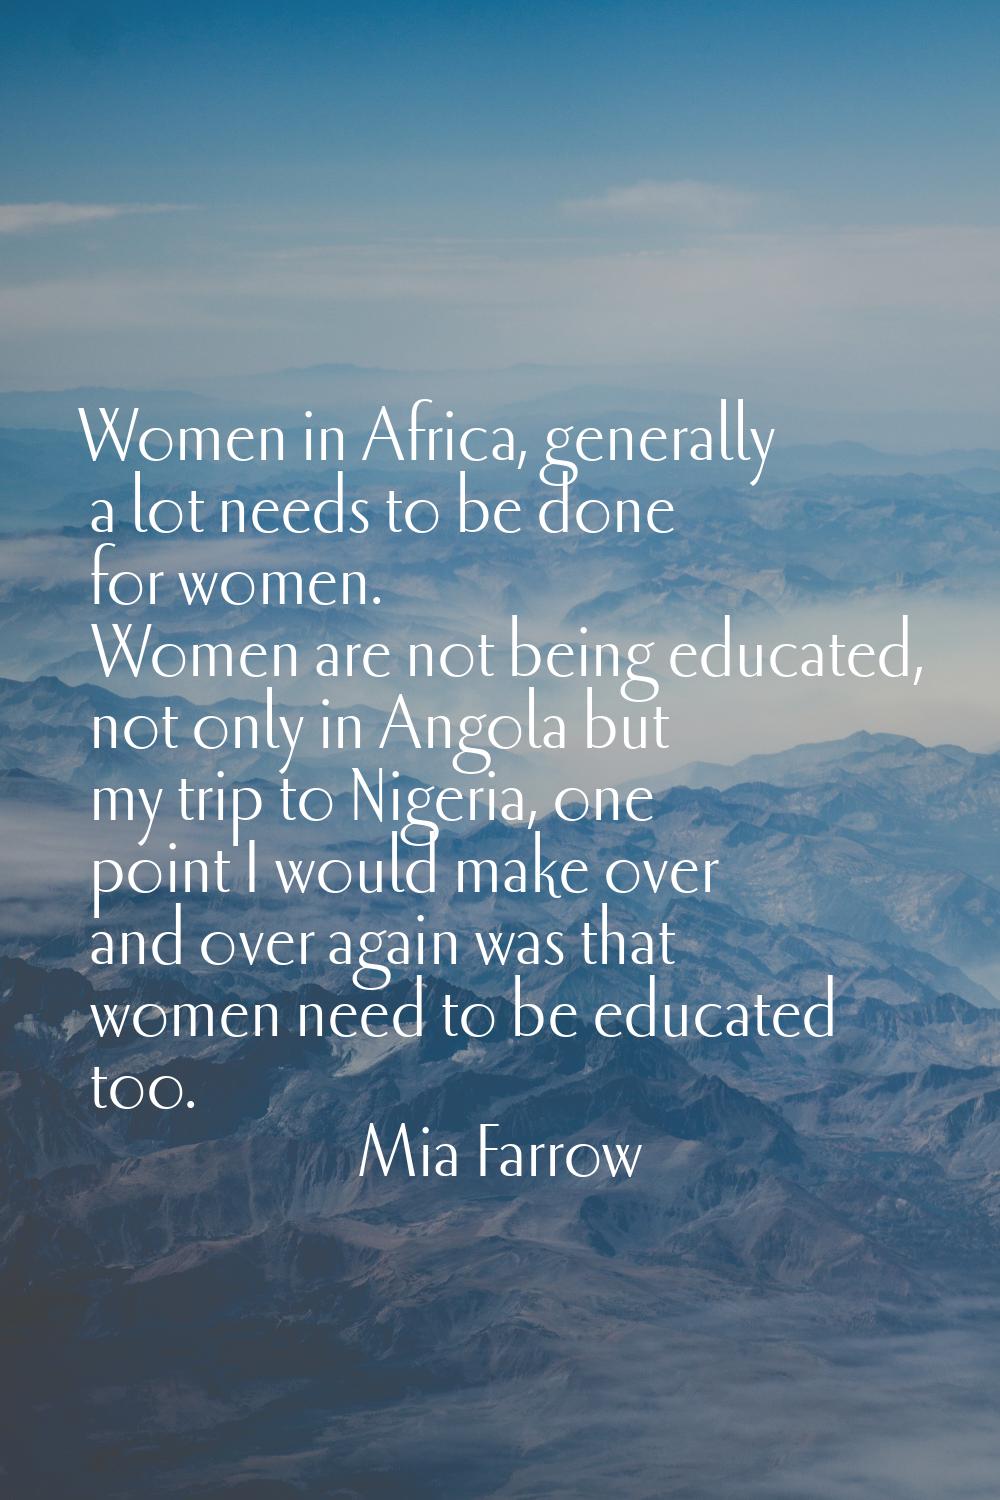 Women in Africa, generally a lot needs to be done for women. Women are not being educated, not only